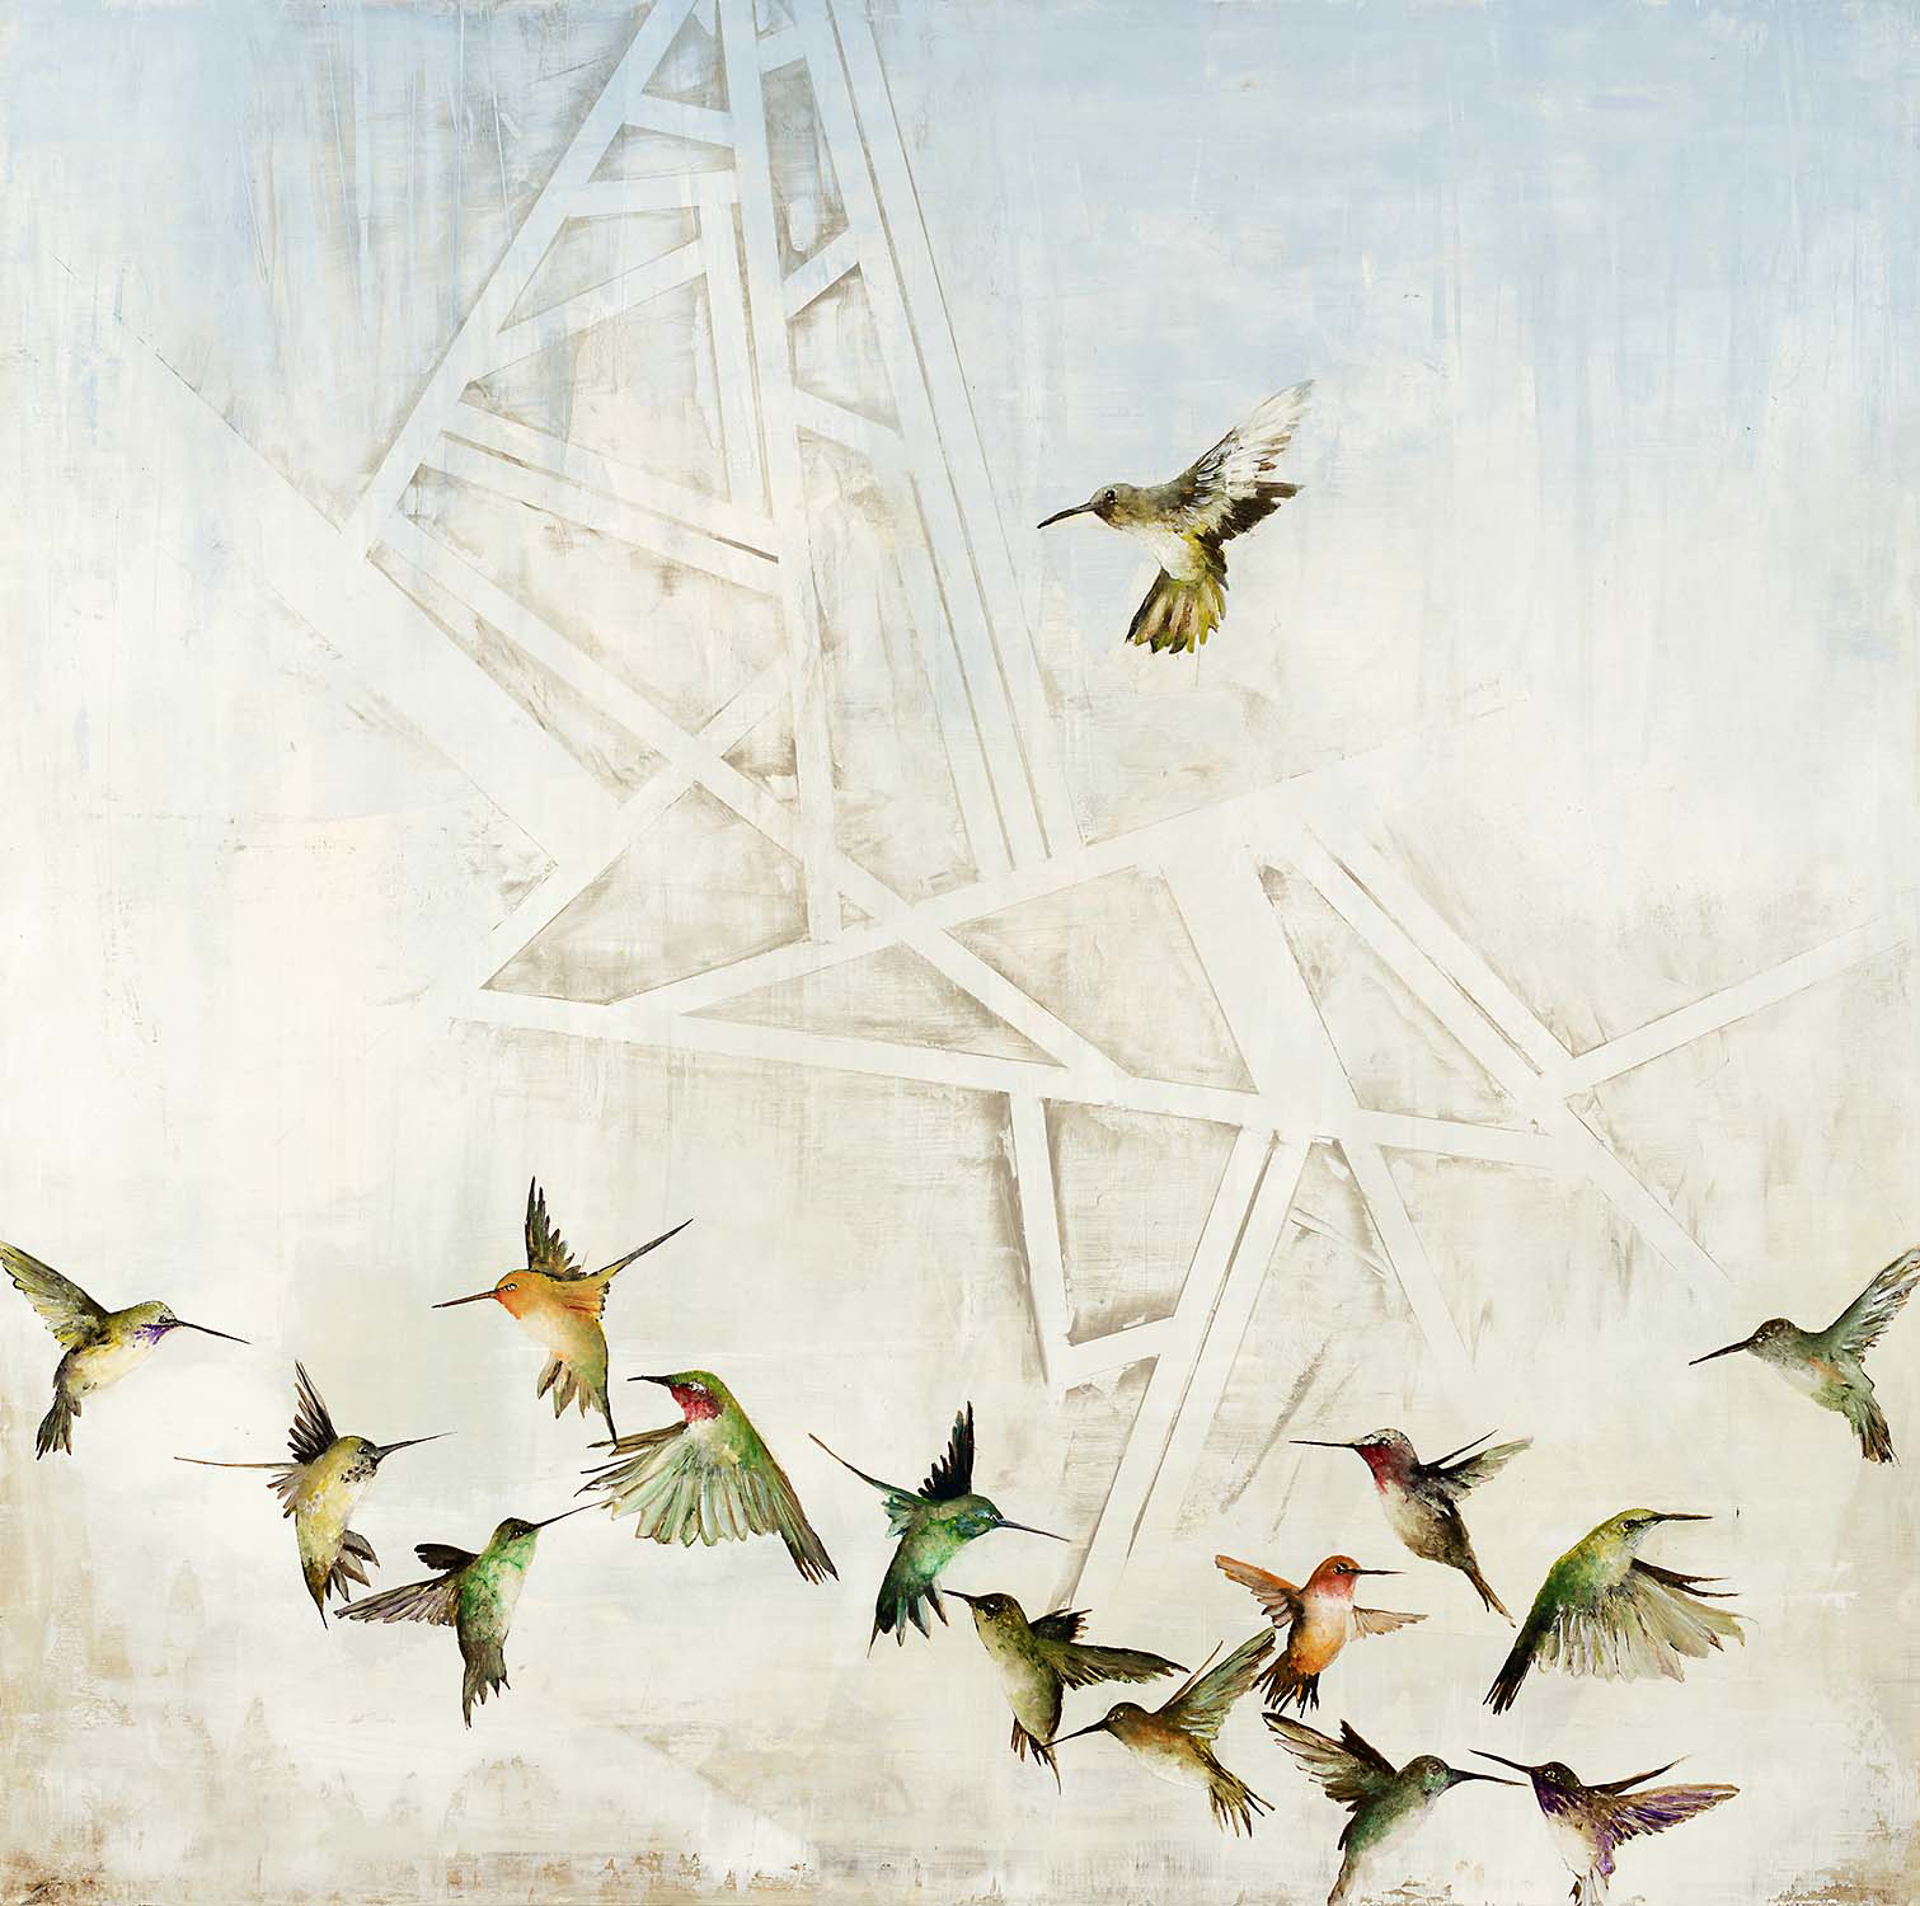 Contemporary Oil Painting Of Many Humming Birds In Flight On A Light White And Blue Background, Fine Art By Jenna Von Benedikt